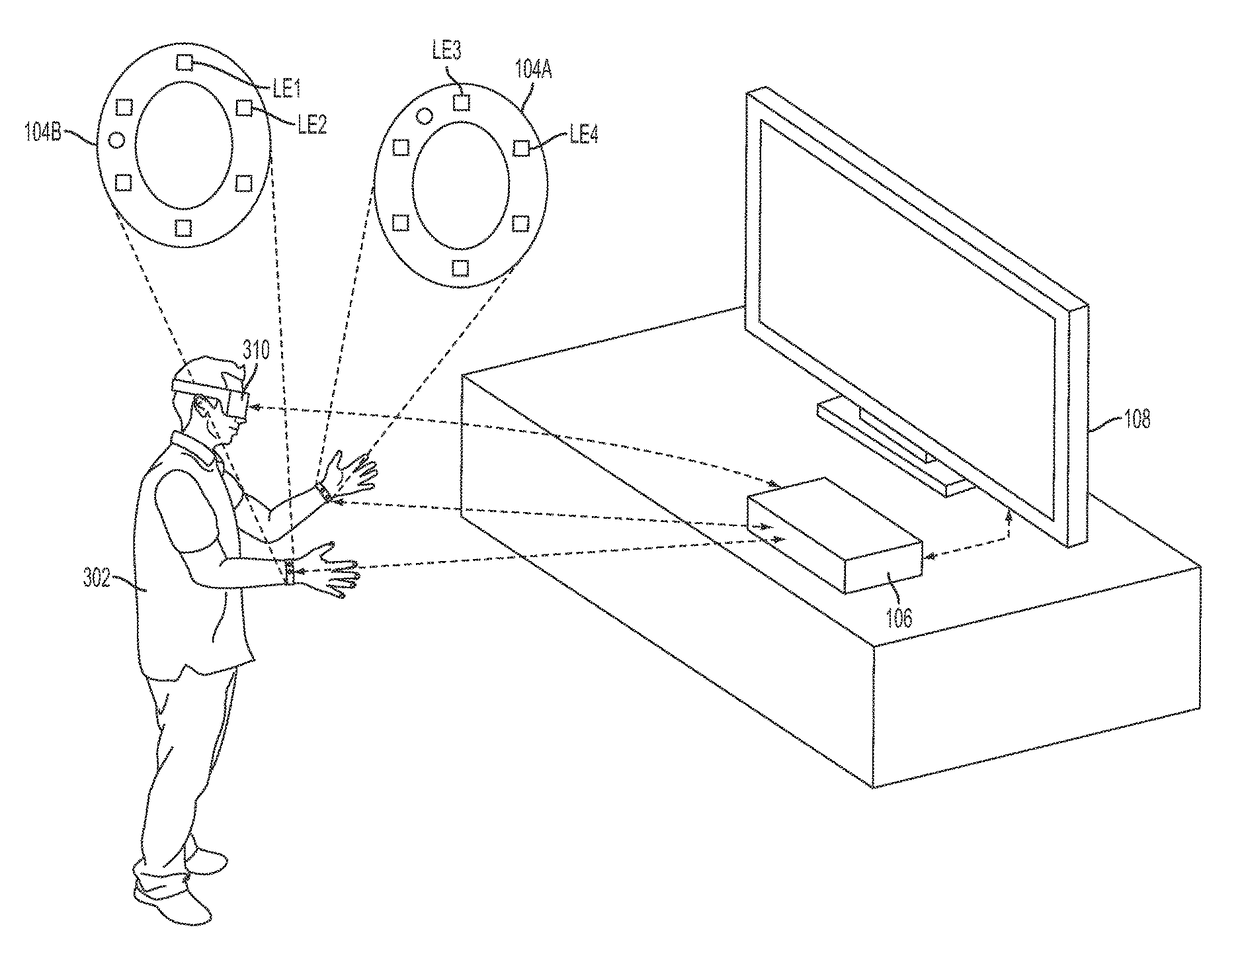 Gaming device with rotatably placed cameras